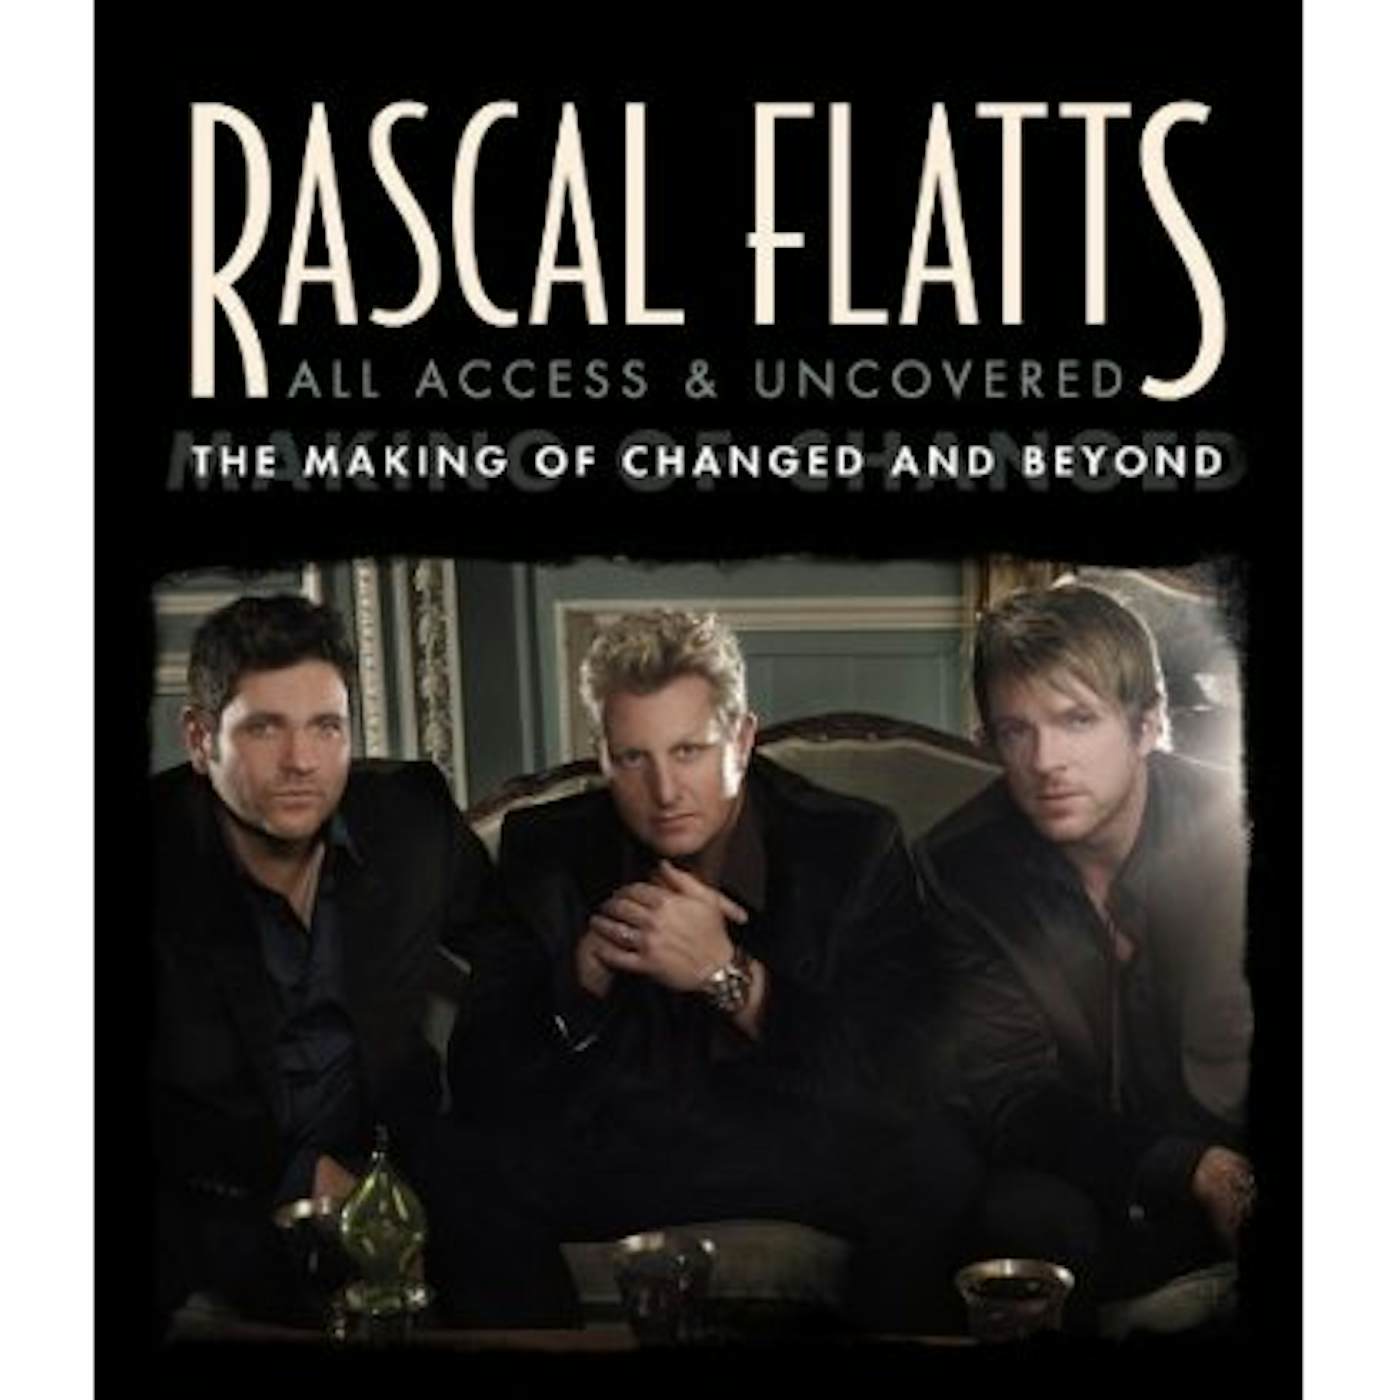 Rascal Flatts ALL ACCESS & UNCOVERED DVD